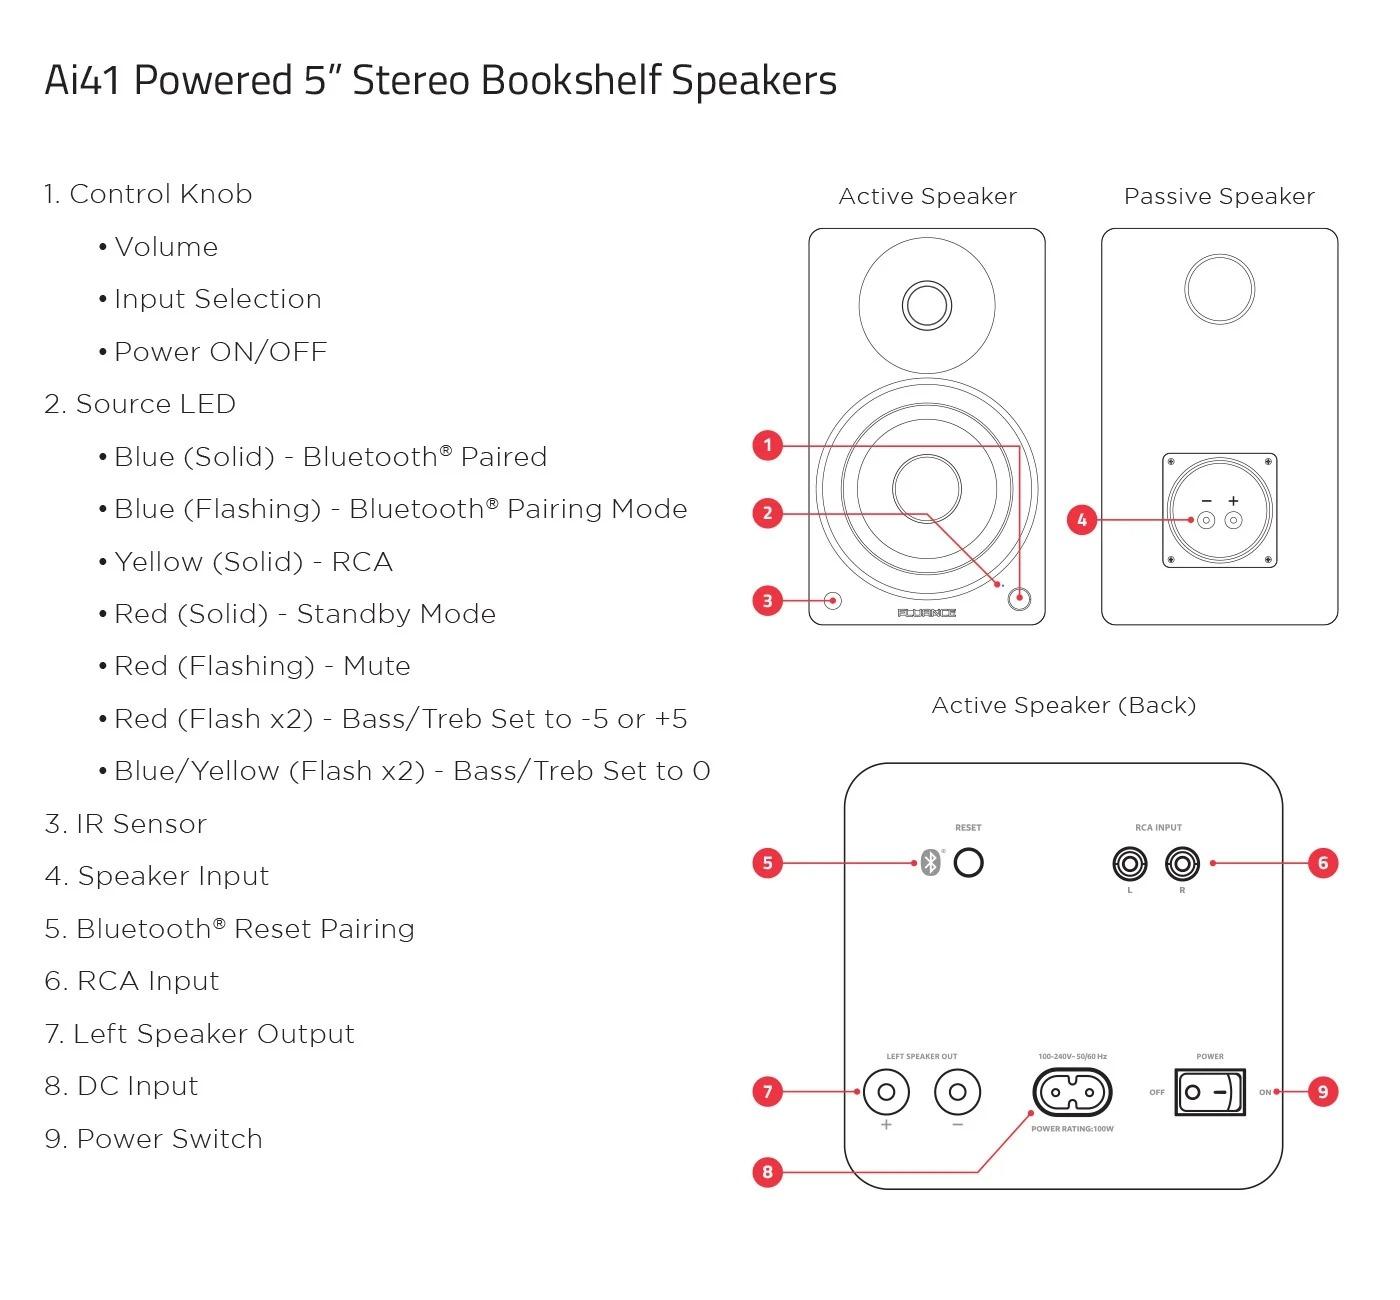 The Ai41 Powered Bookshelf Speakers offer great sound and connectivity options that should satisfy most listeners.